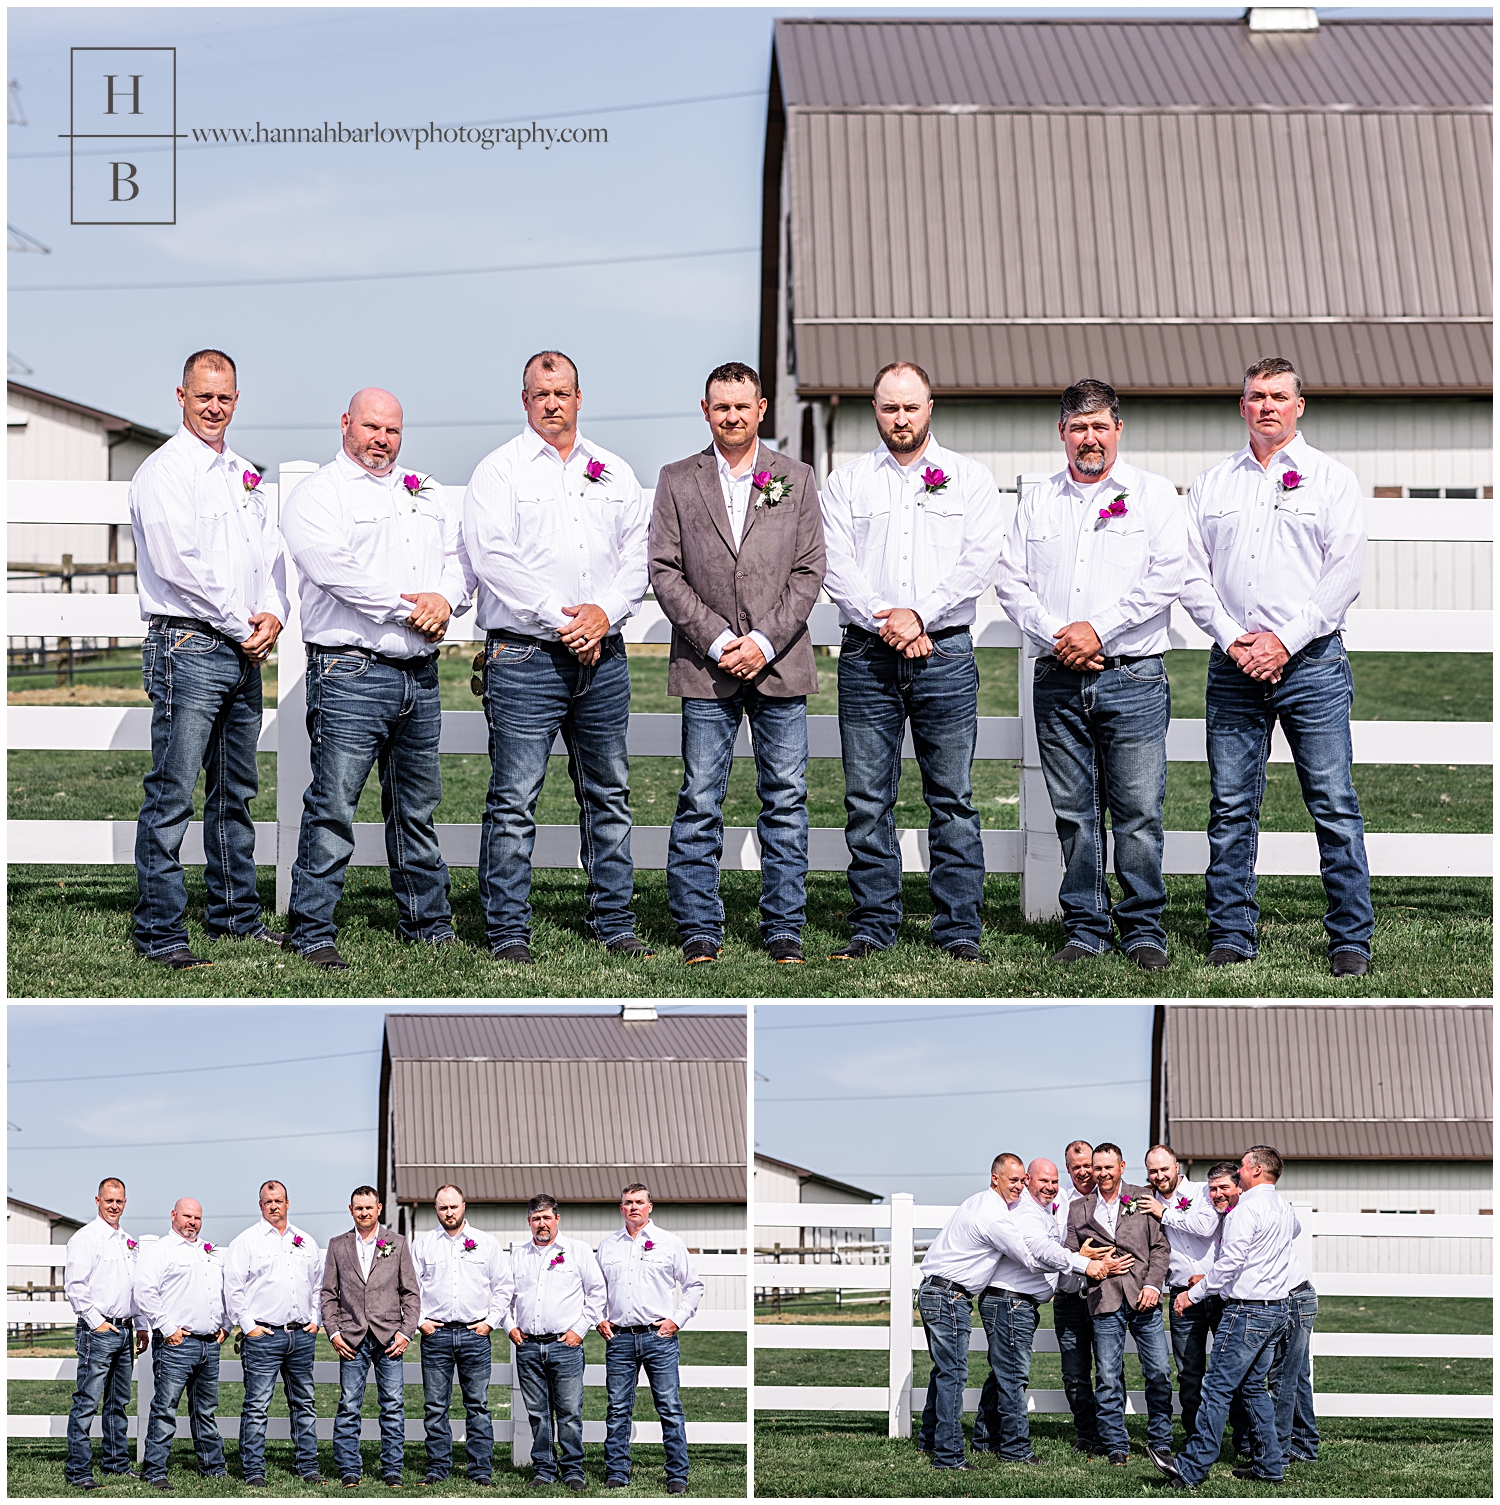 Groom and groomsmen in jeans and white dress shirts pose for bridal party photos.